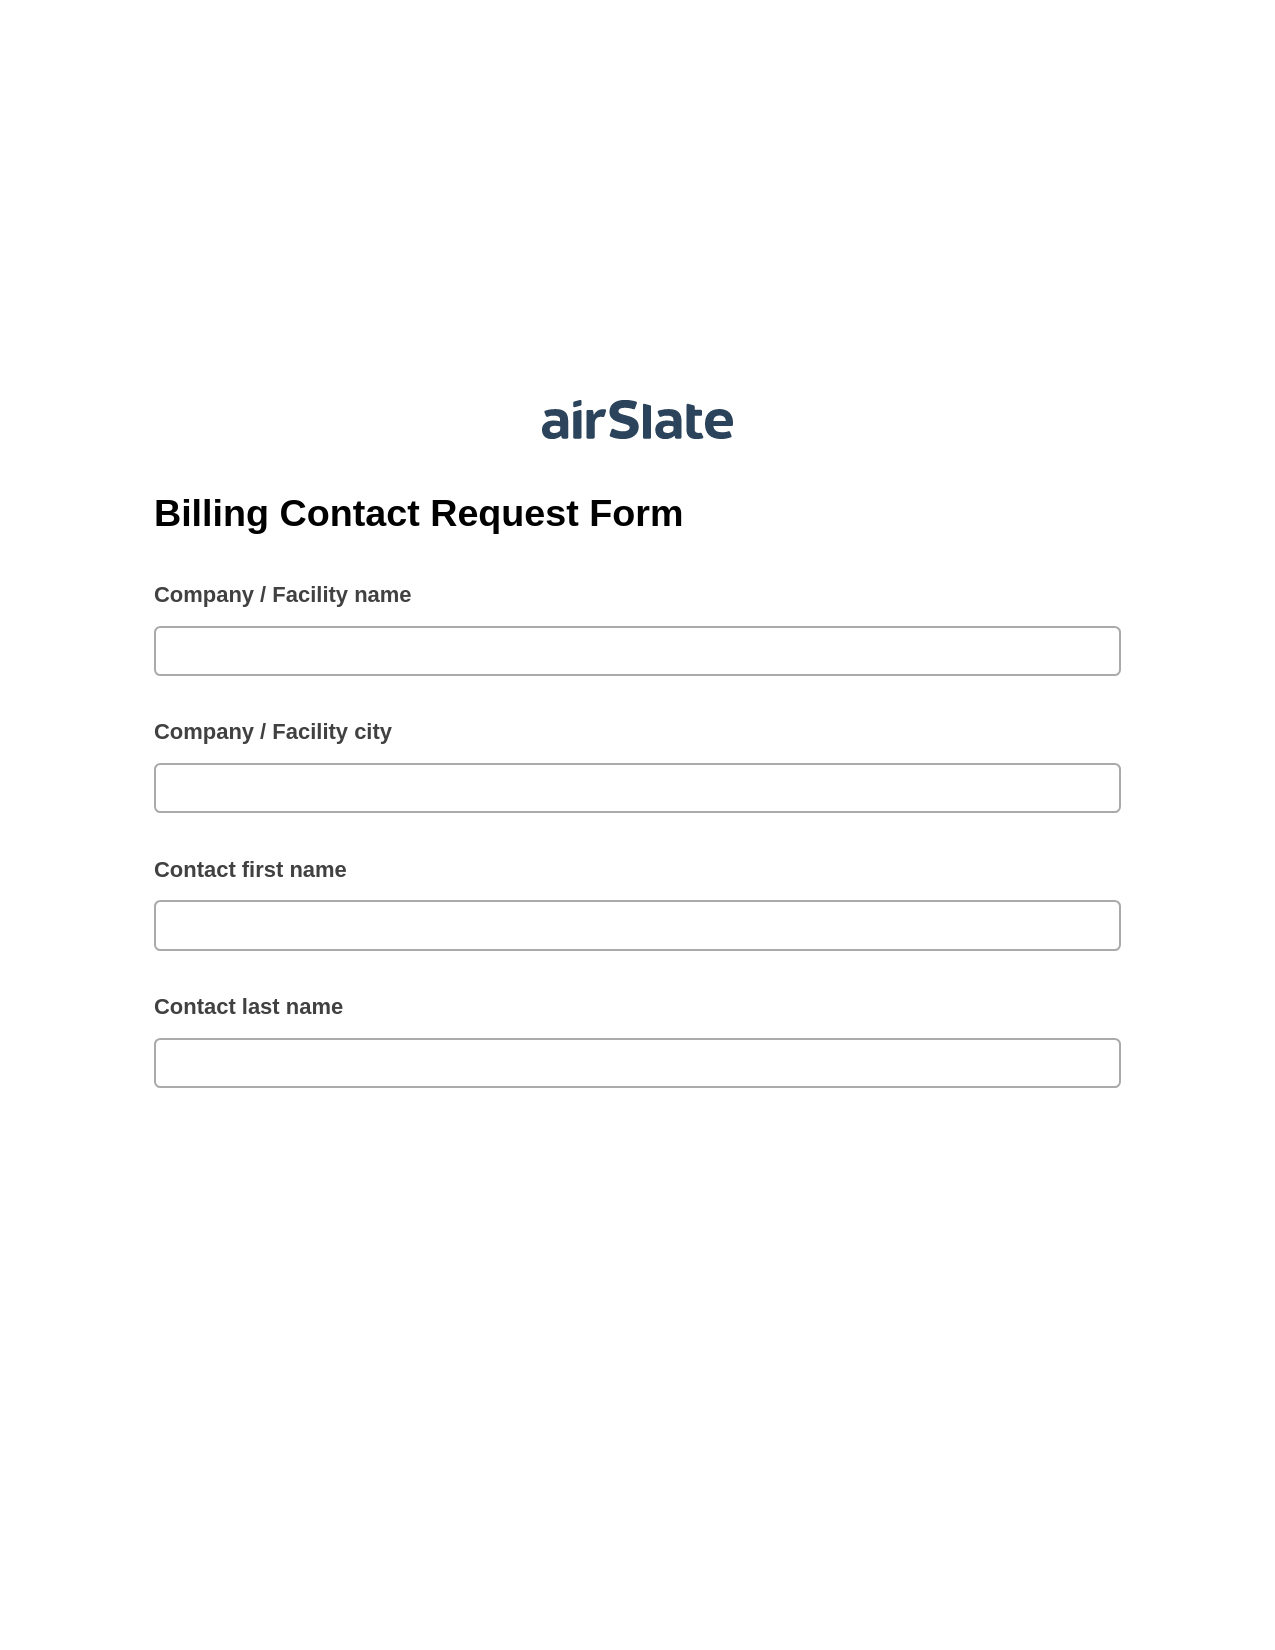 Billing Contact Request Form Pre-fill Dropdowns from MySQL Bot, Remove Slate Bot, Export to Formstack Documents Bot